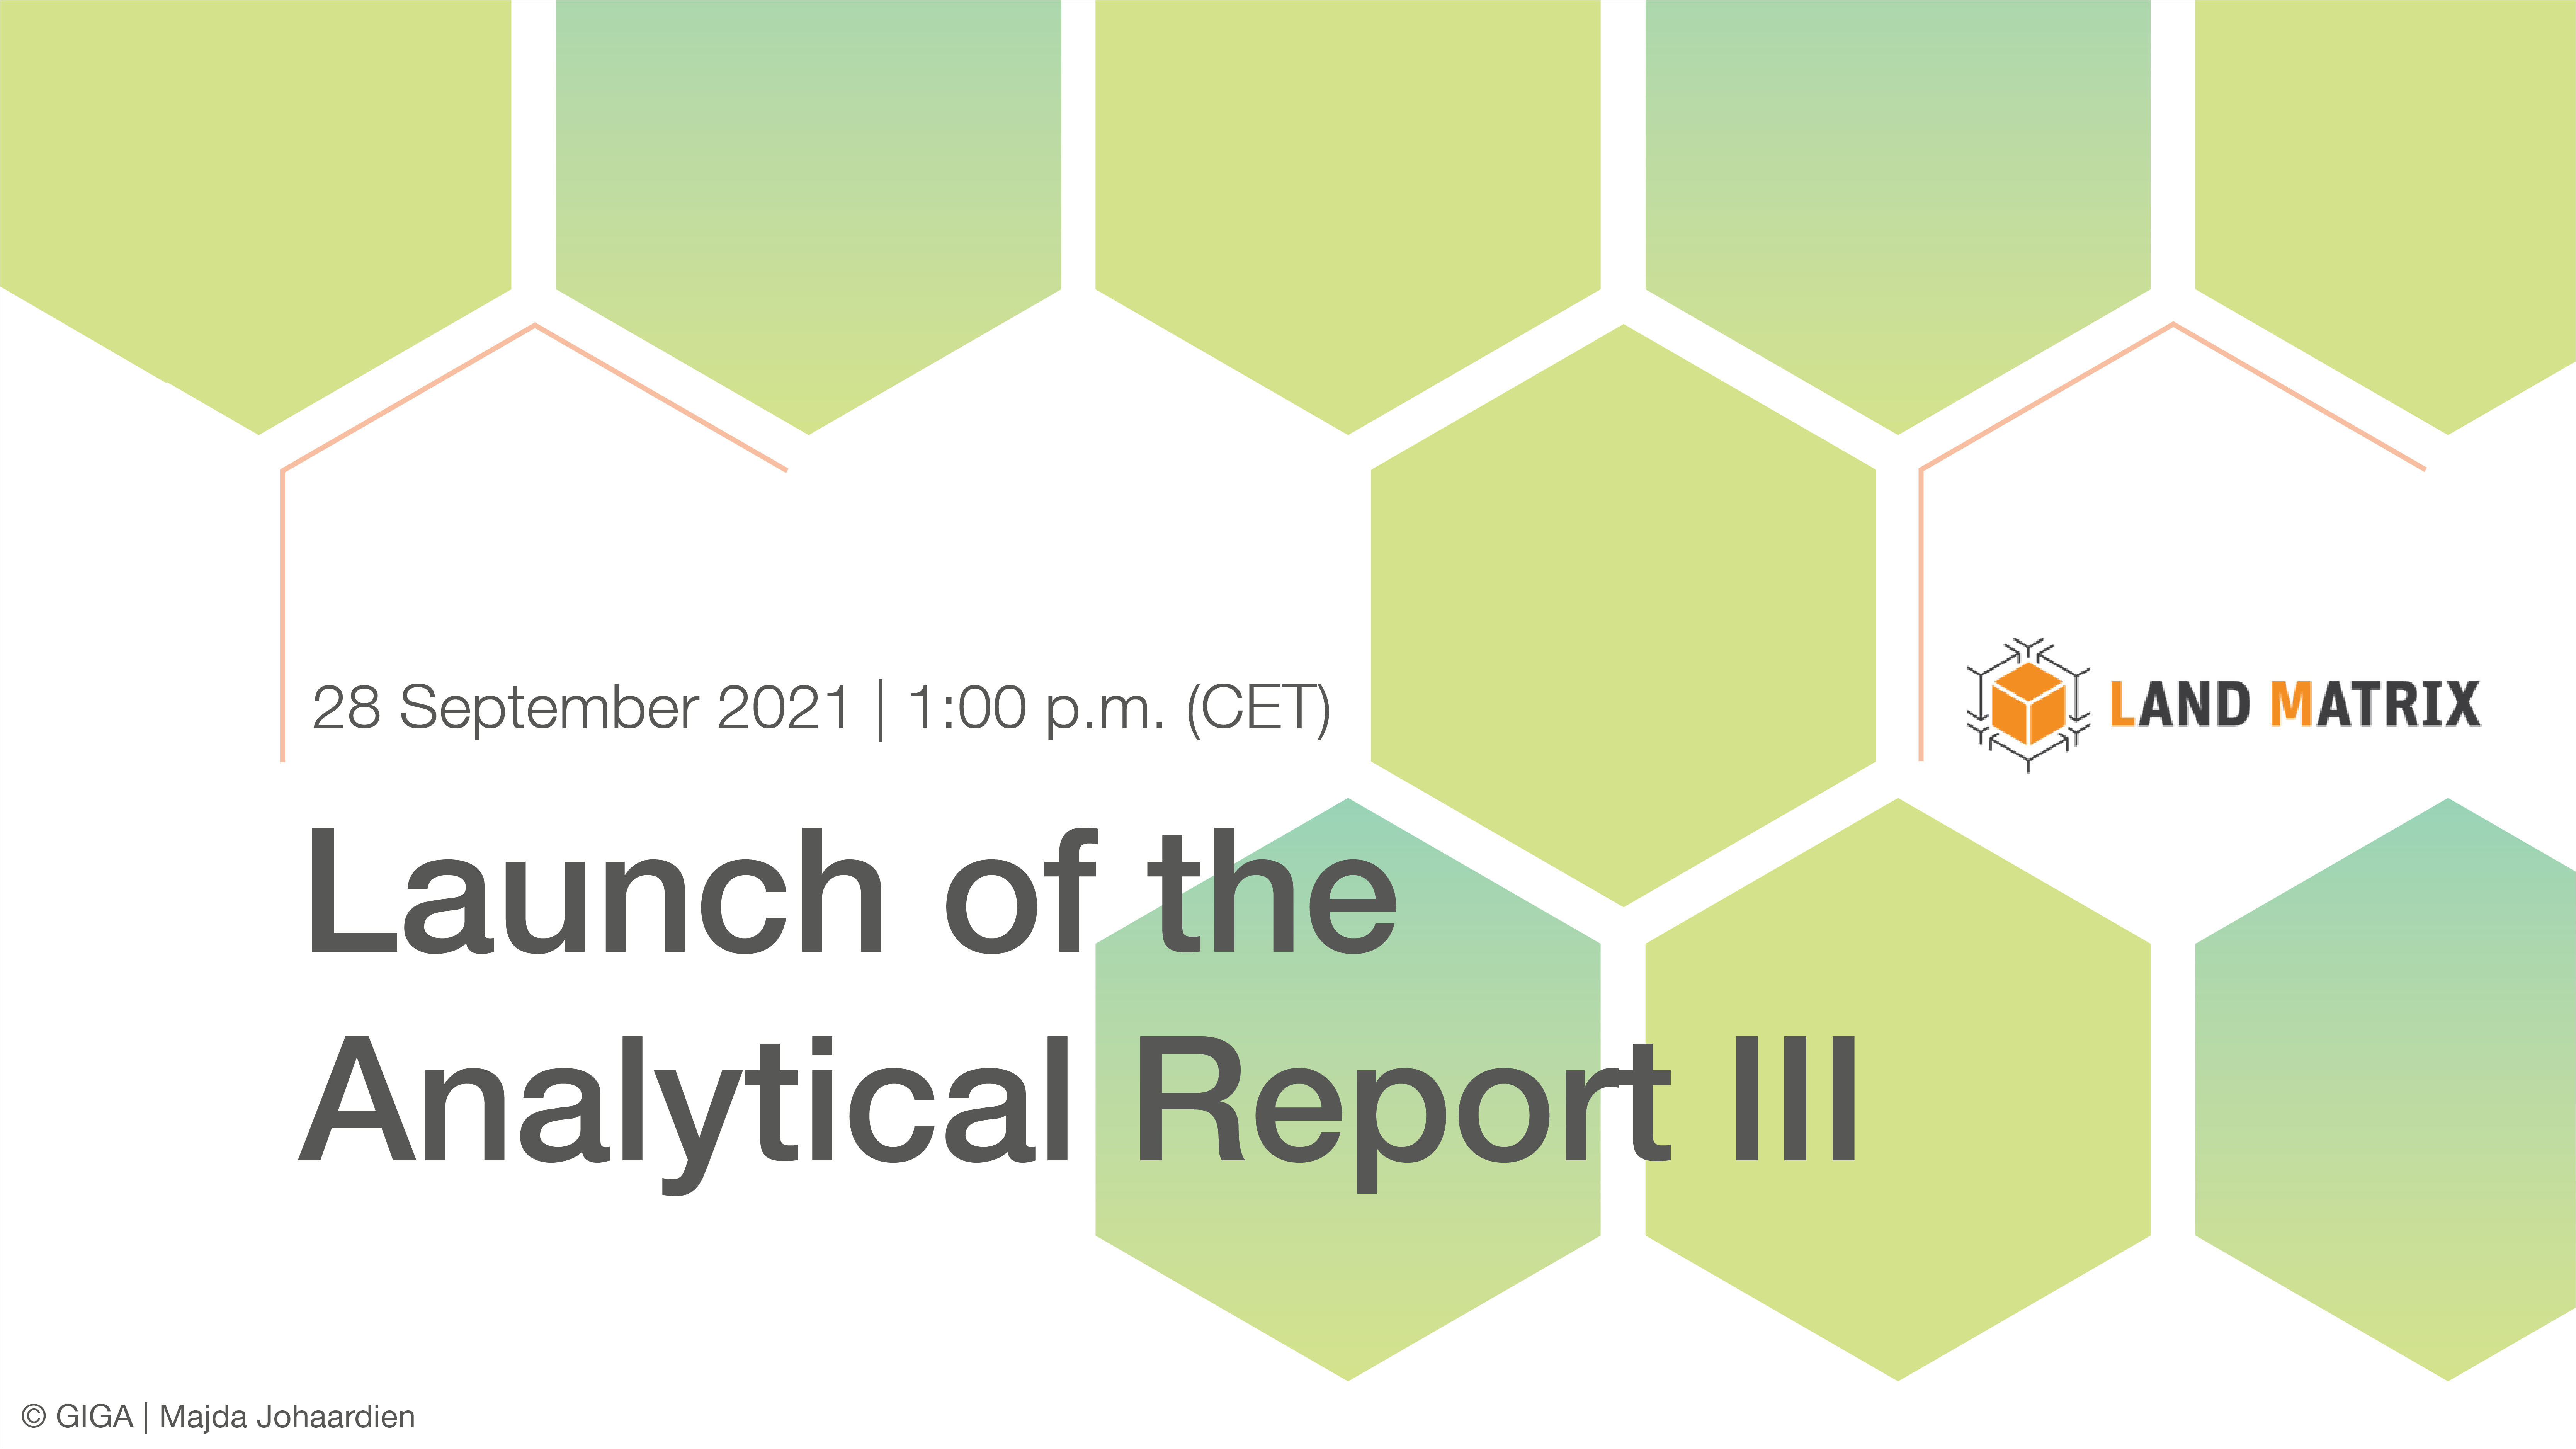 Launch of the Land Matrix Analytical Report III: Taking Stock of the Global Land Rush